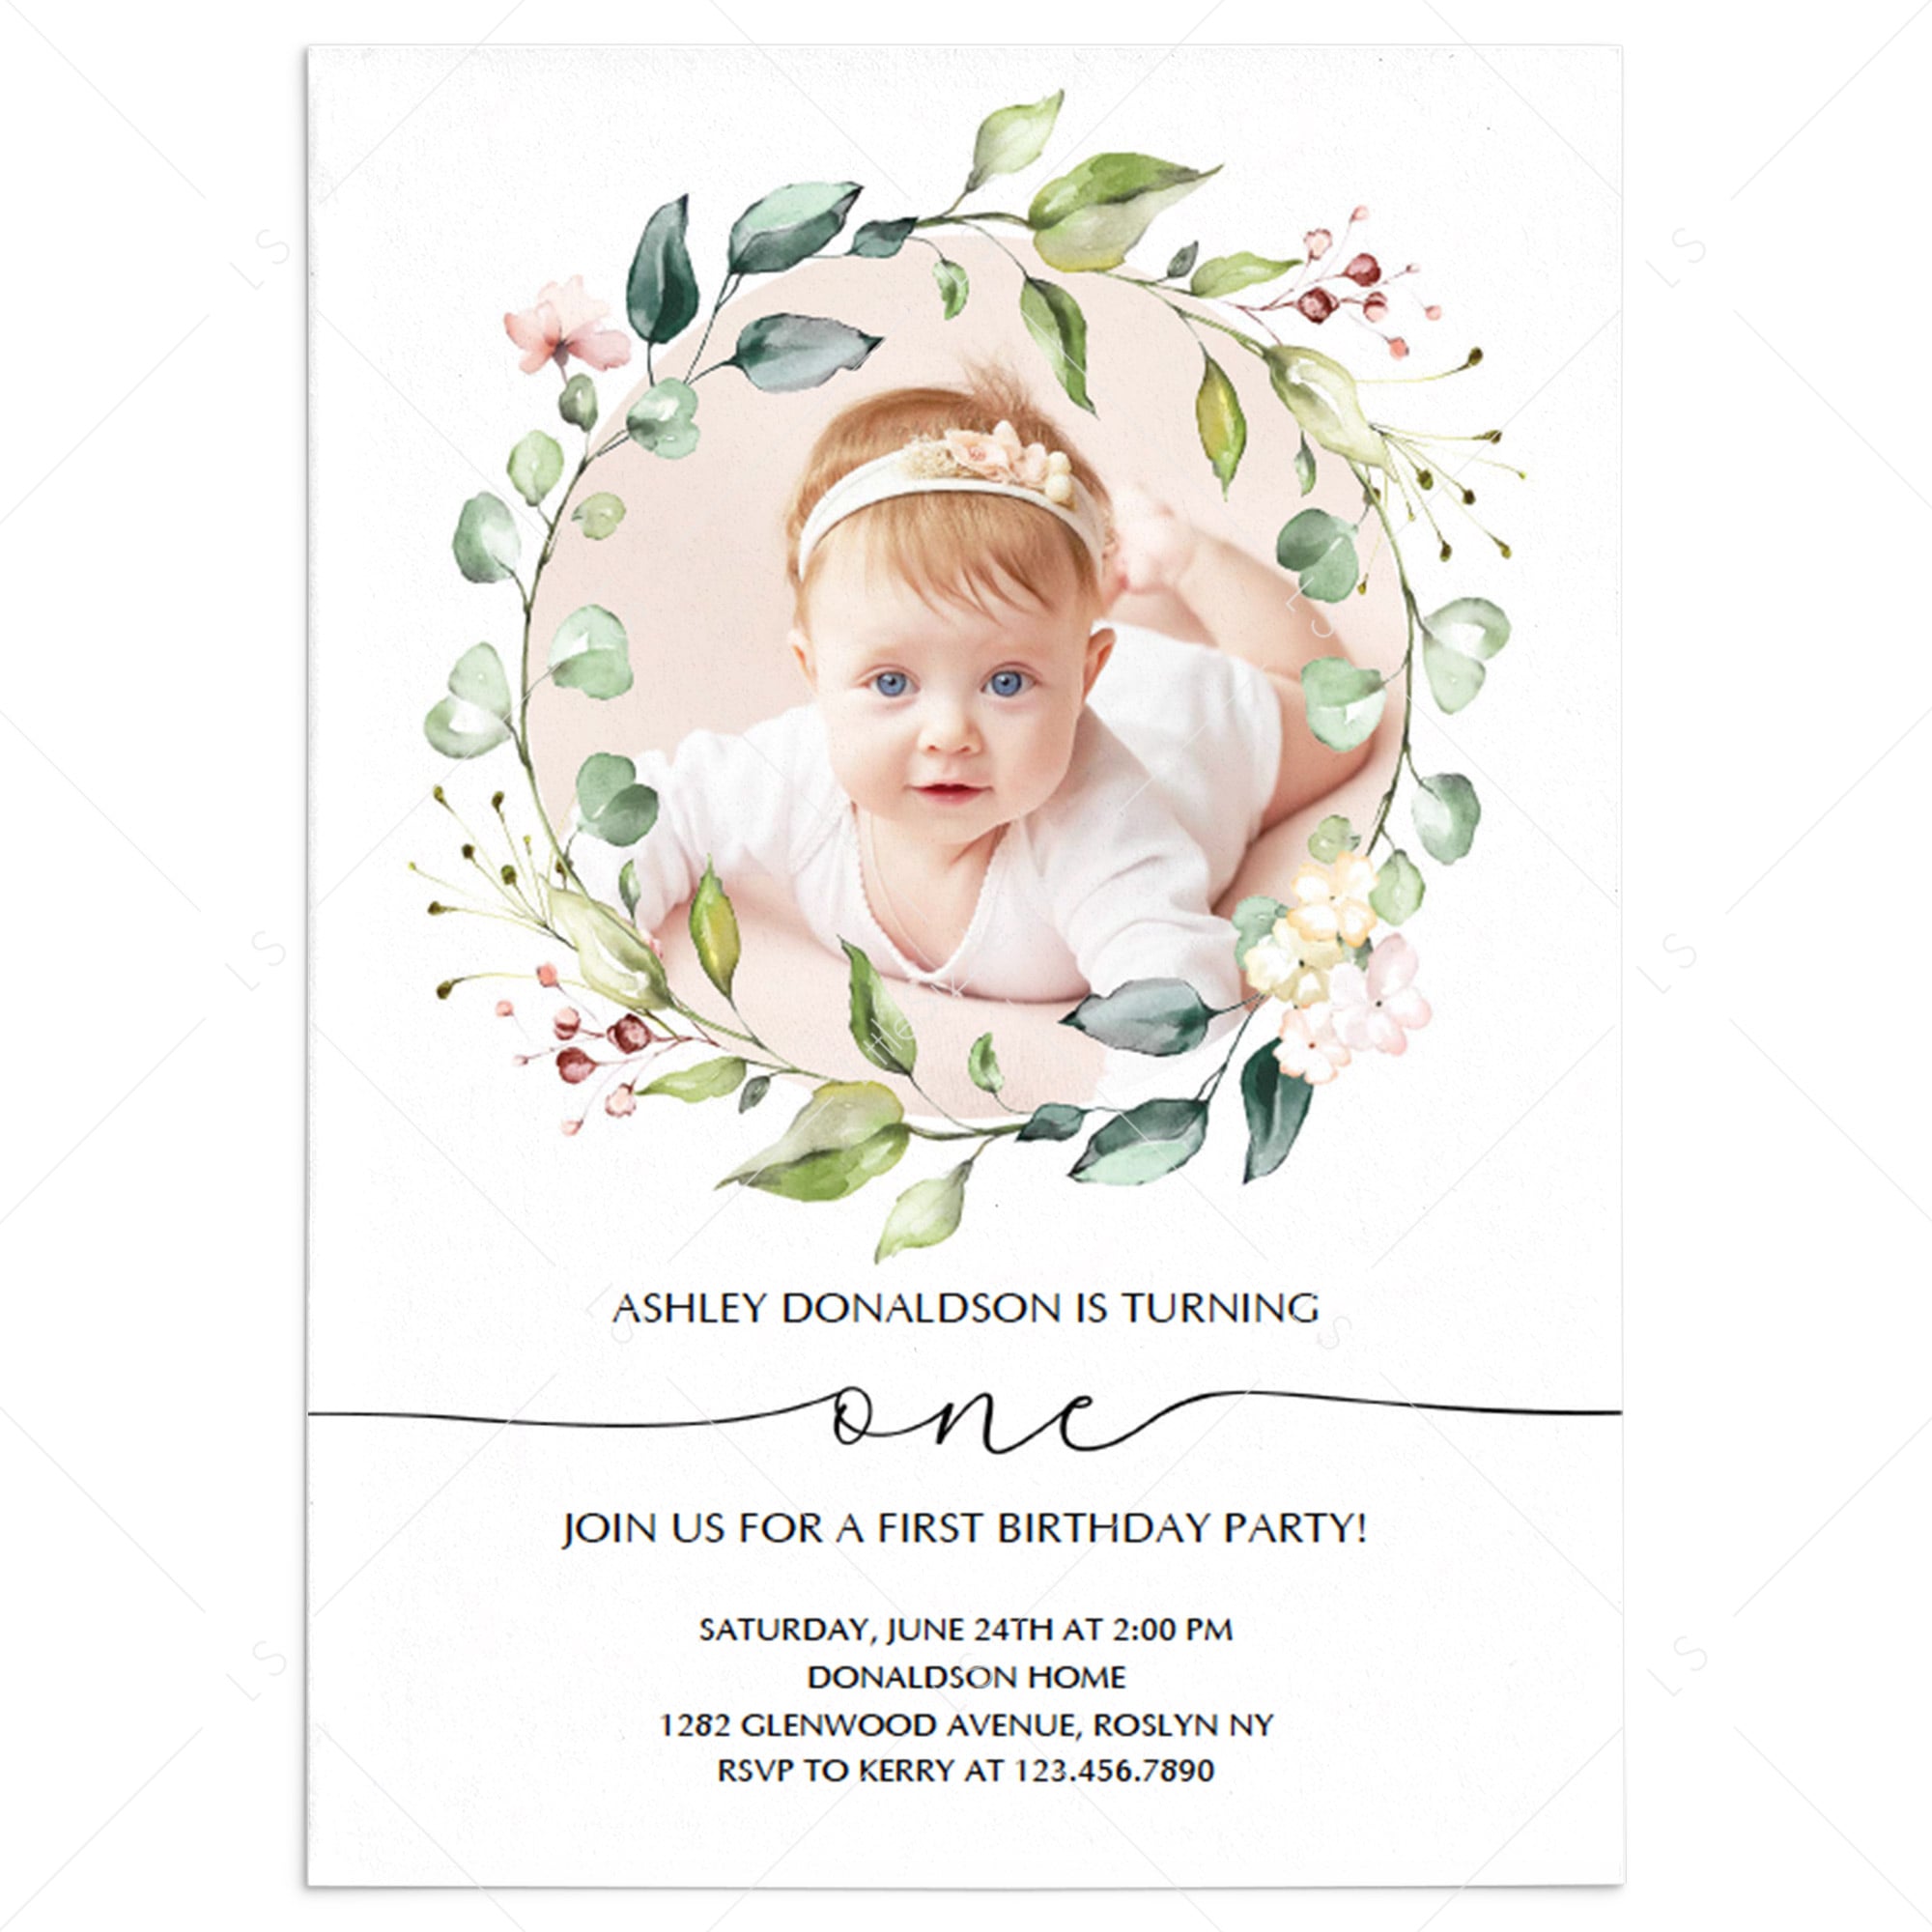 Photo First Birthday Invitation Template with Watercolor Leaves by LittleSizzle